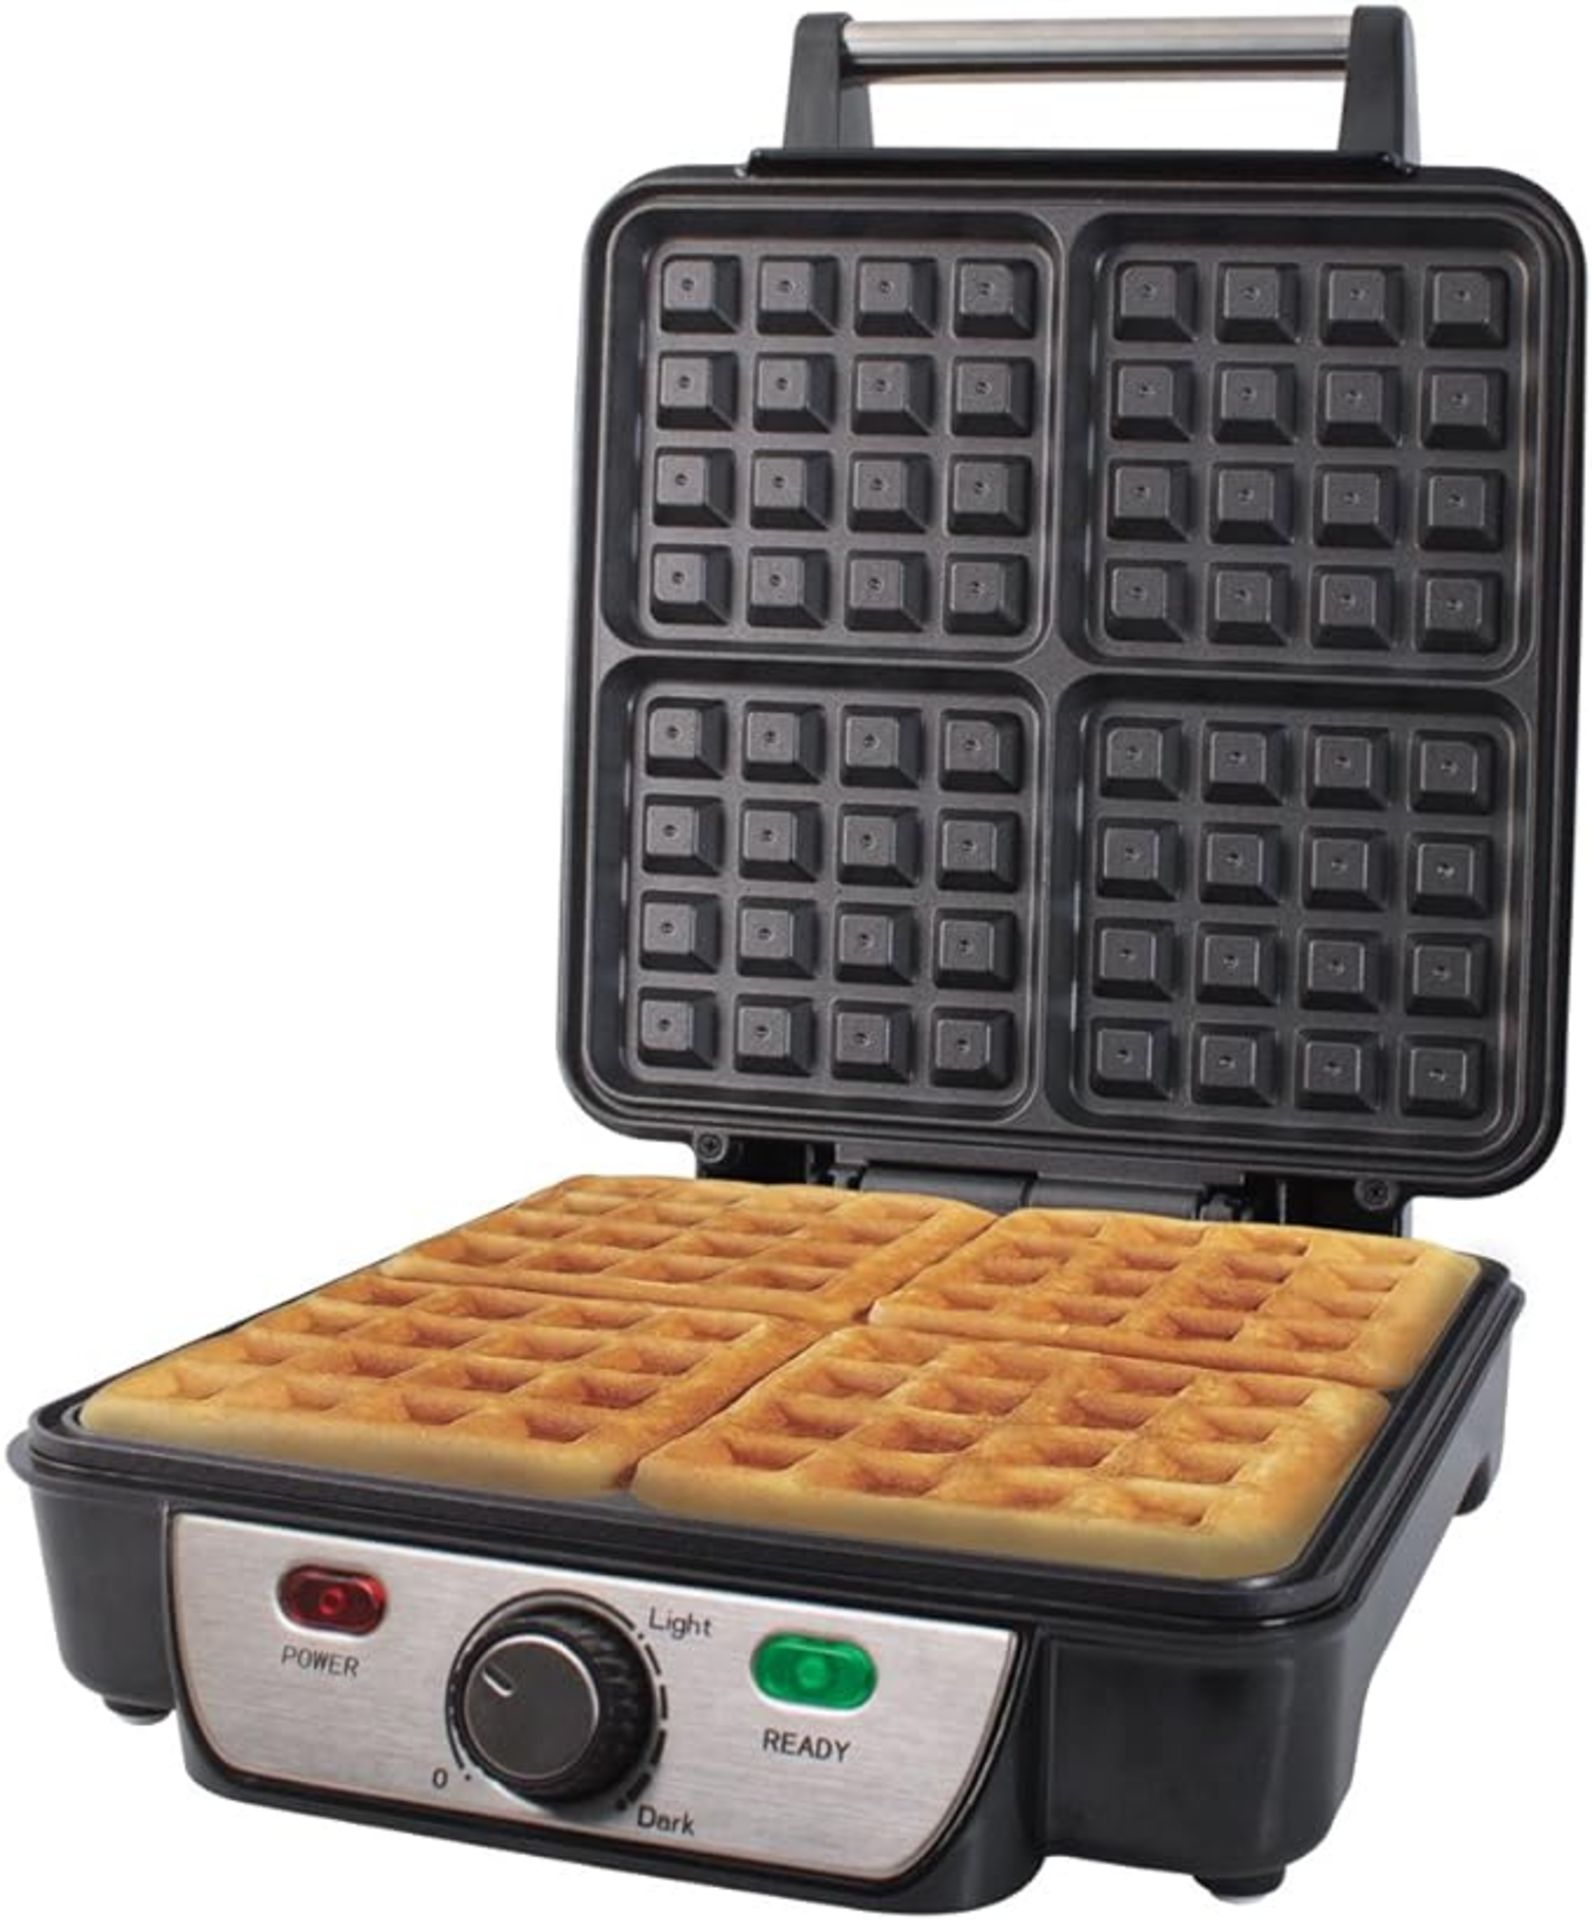 2 x Quest 35940 Four Slice Deep Fill Waffle Maker / Non-Stick Hot Plates / Adjustable